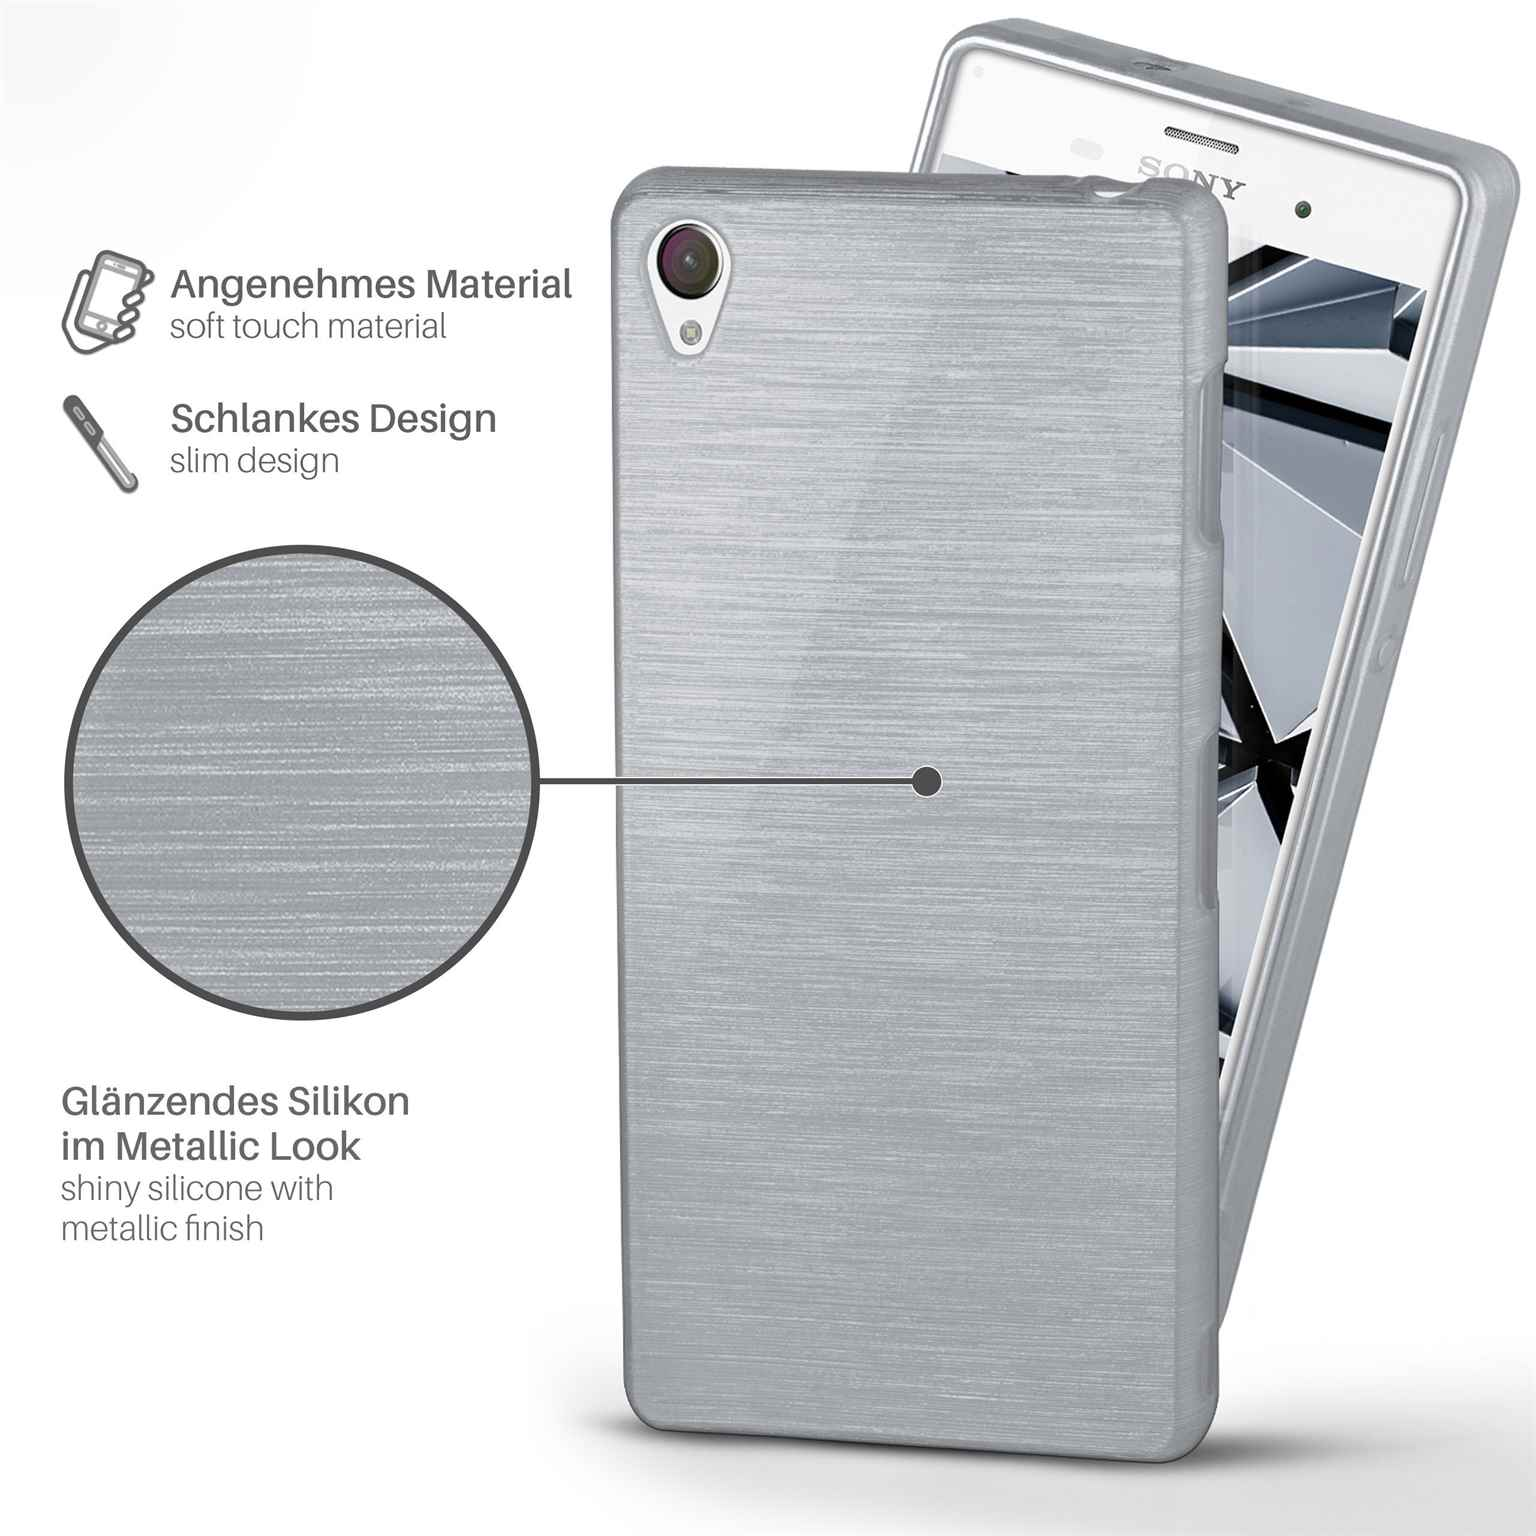 Platin-Silver Z3, Backcover, Brushed MOEX Sony, Xperia Case,